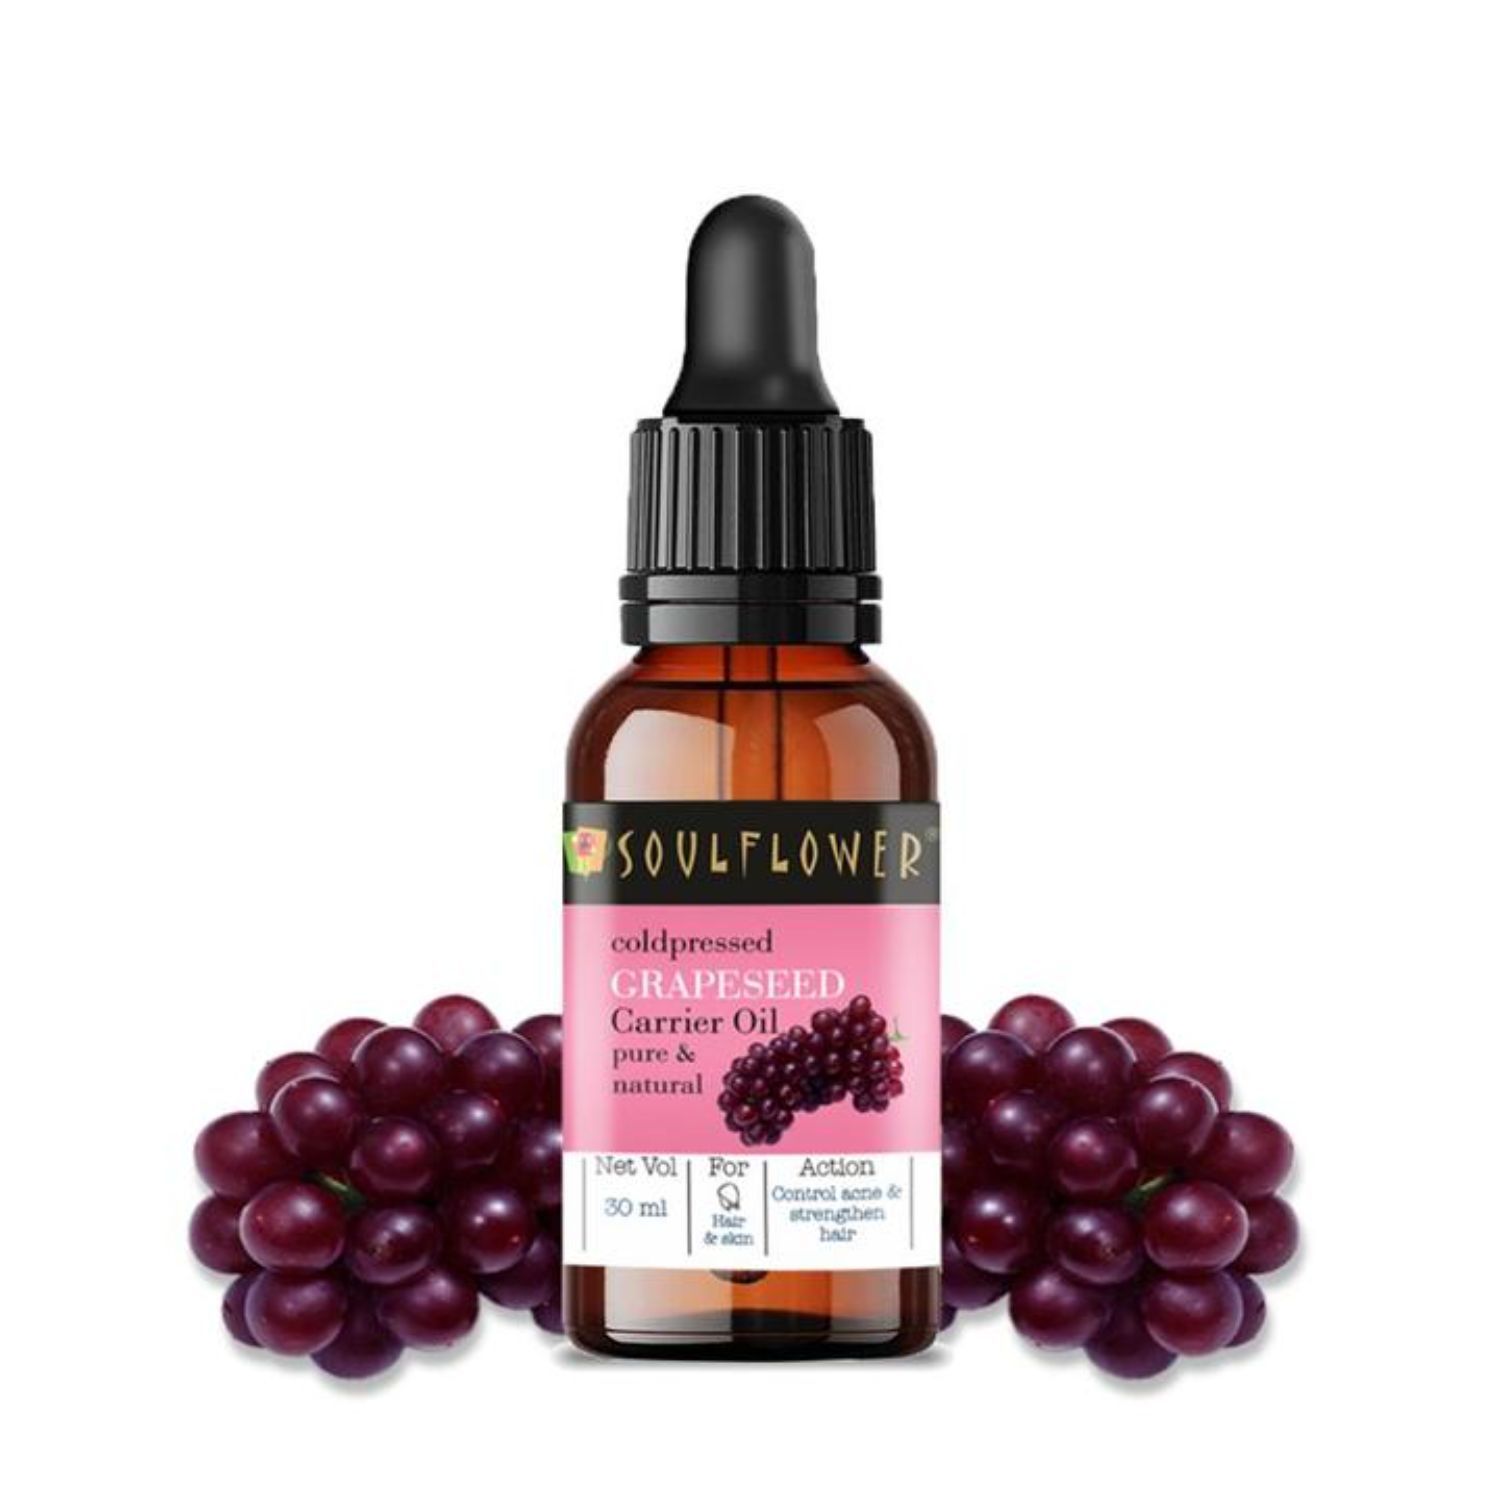 Soulflower Organic Grapeseed Face Serum & Carrier Hair Oil For Glowing Skin, Acne, Cold-Pressed